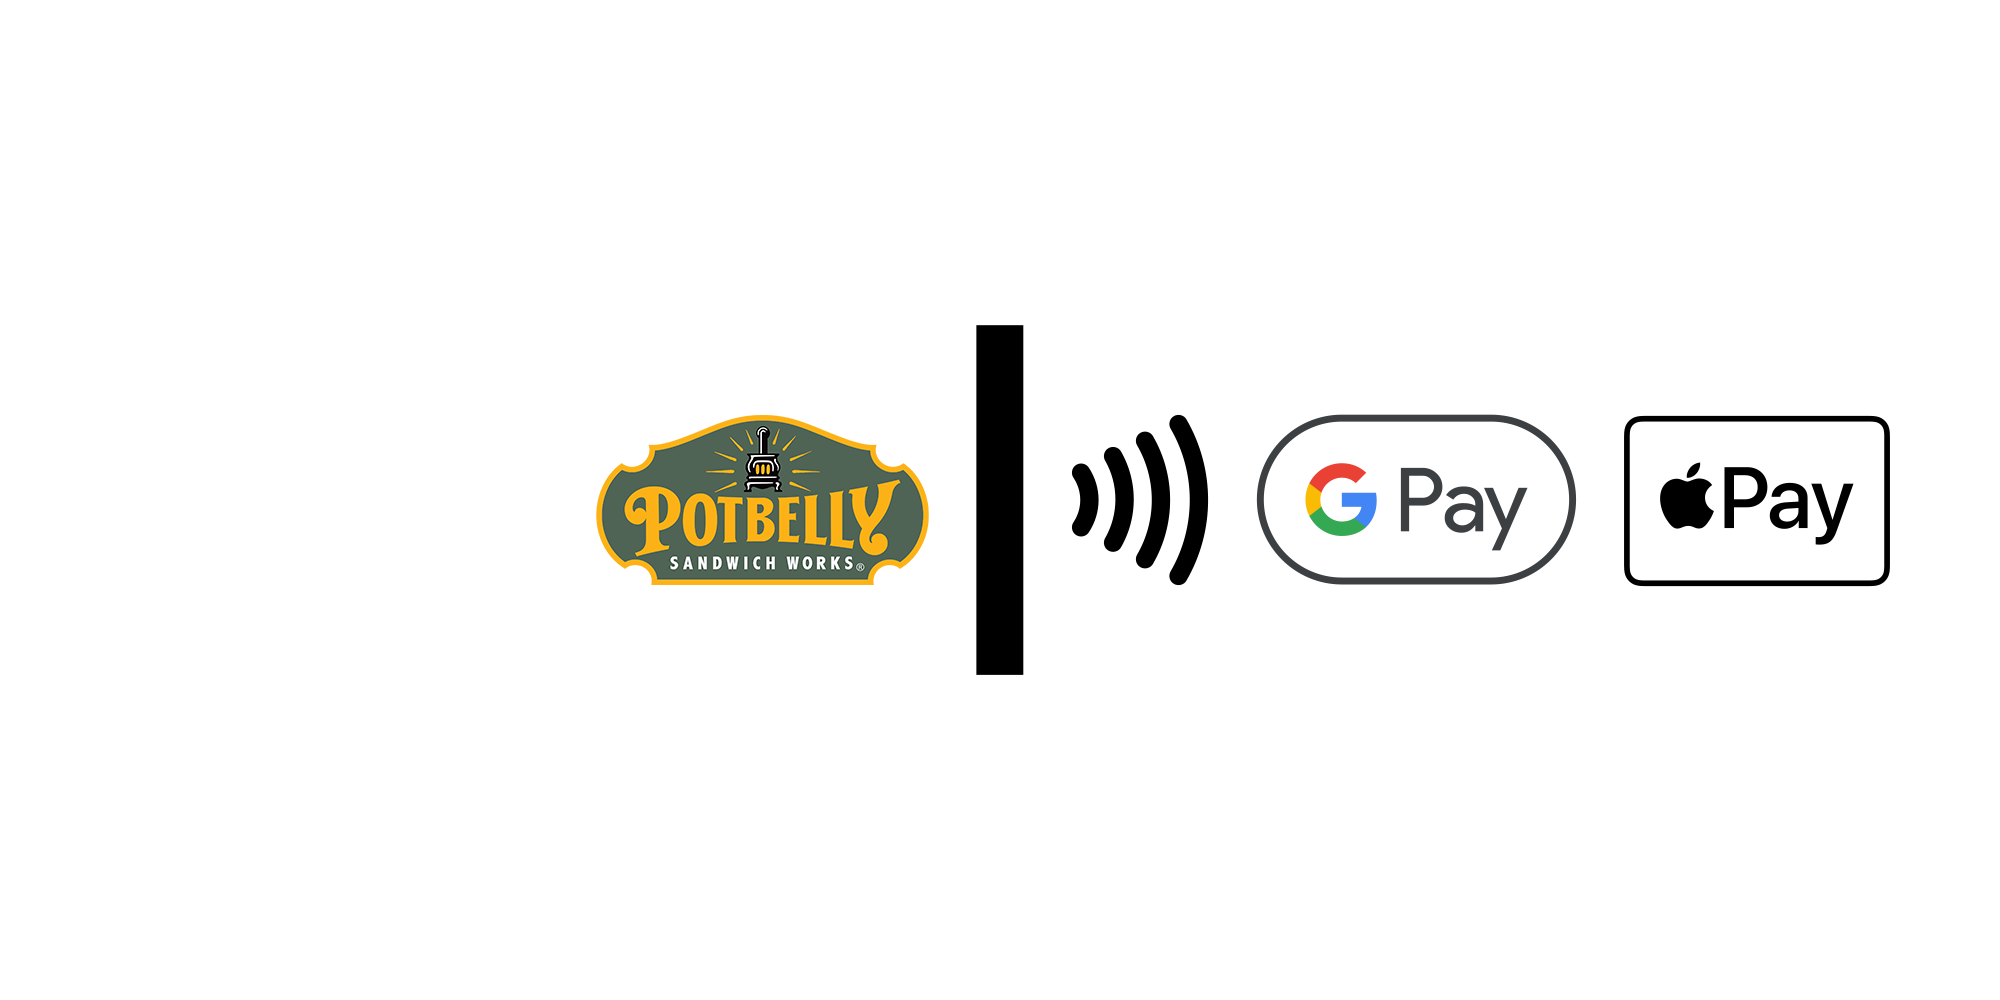 Potbelly Sandwich Works accepts contactless payments, as well as Google Pay & Apple Pay online/in-app.